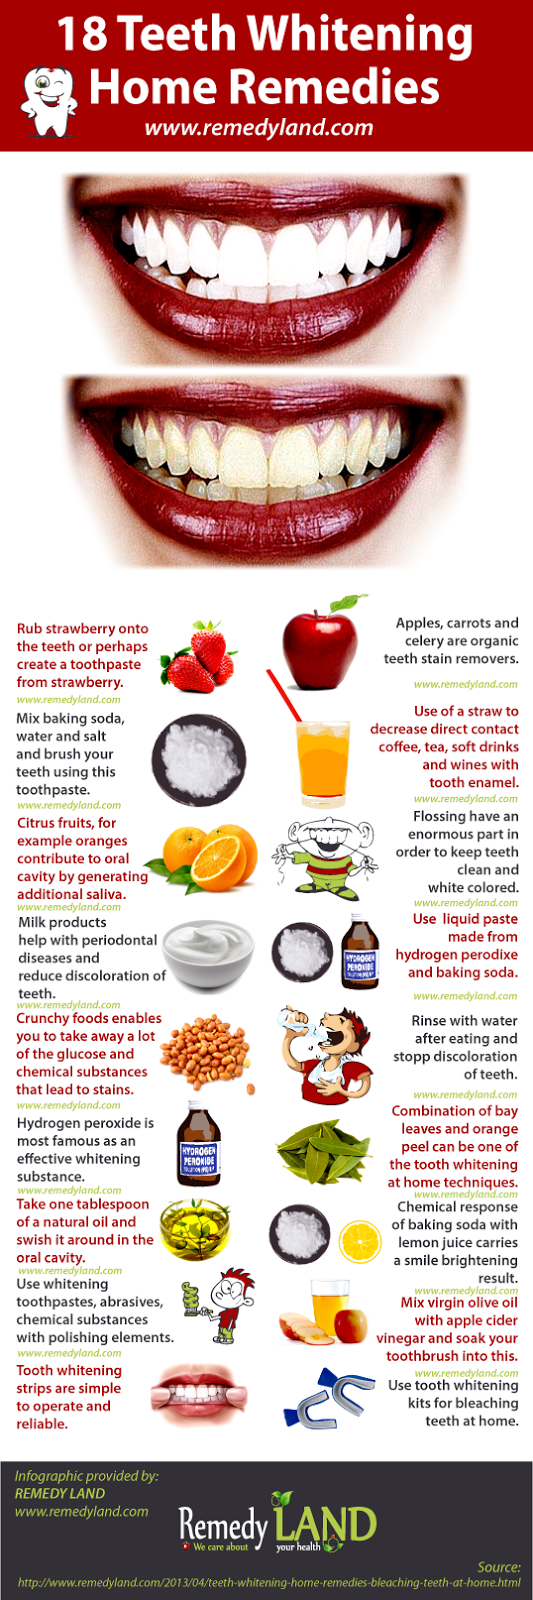 18 Teeth Whitening Home Remedies For Bleaching Teeth At Home - Remedy 